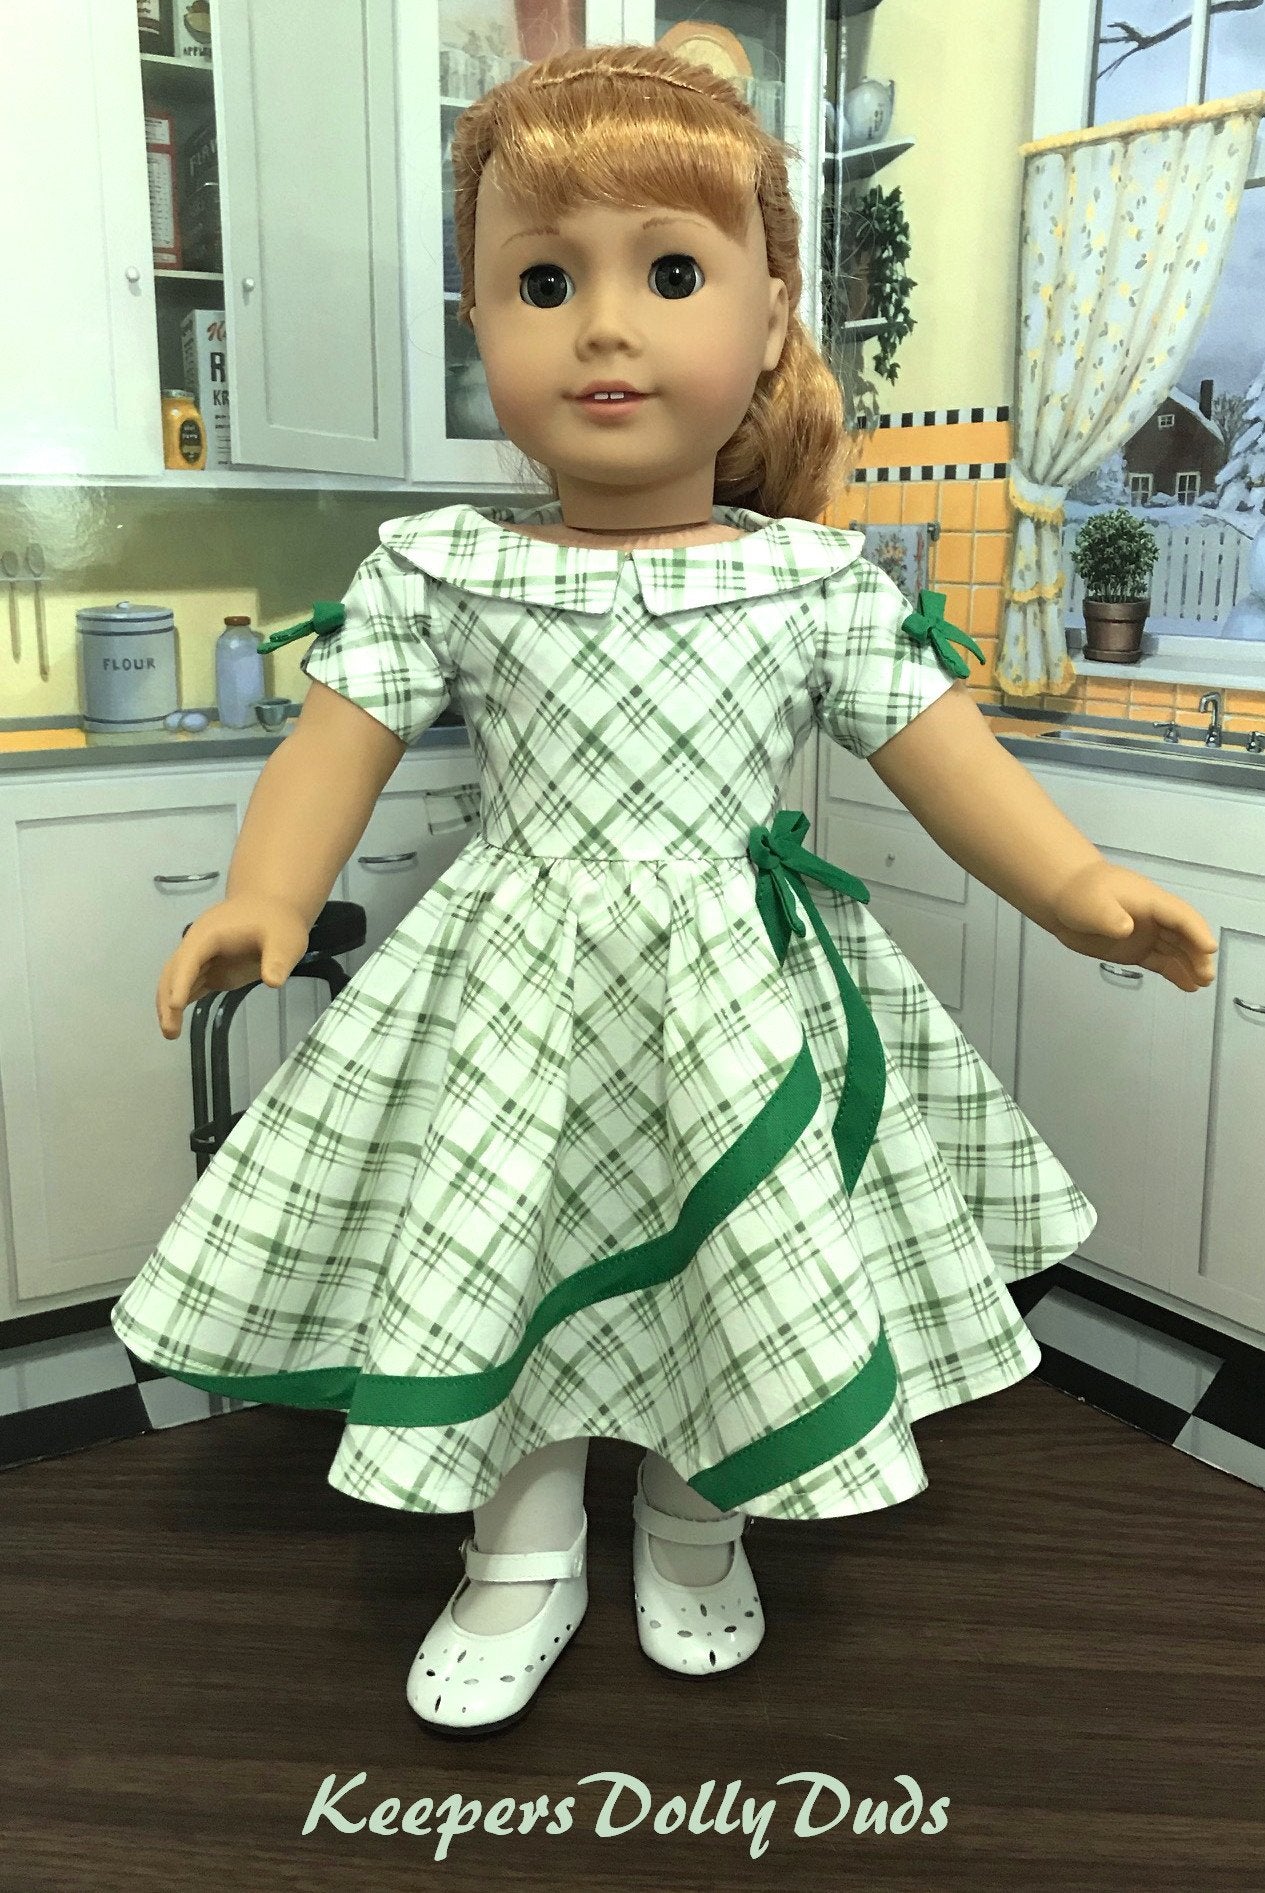 Keepers Dolly Duds 1950s Circle Swirl Dress 18 Doll Clothes PDF Pattern